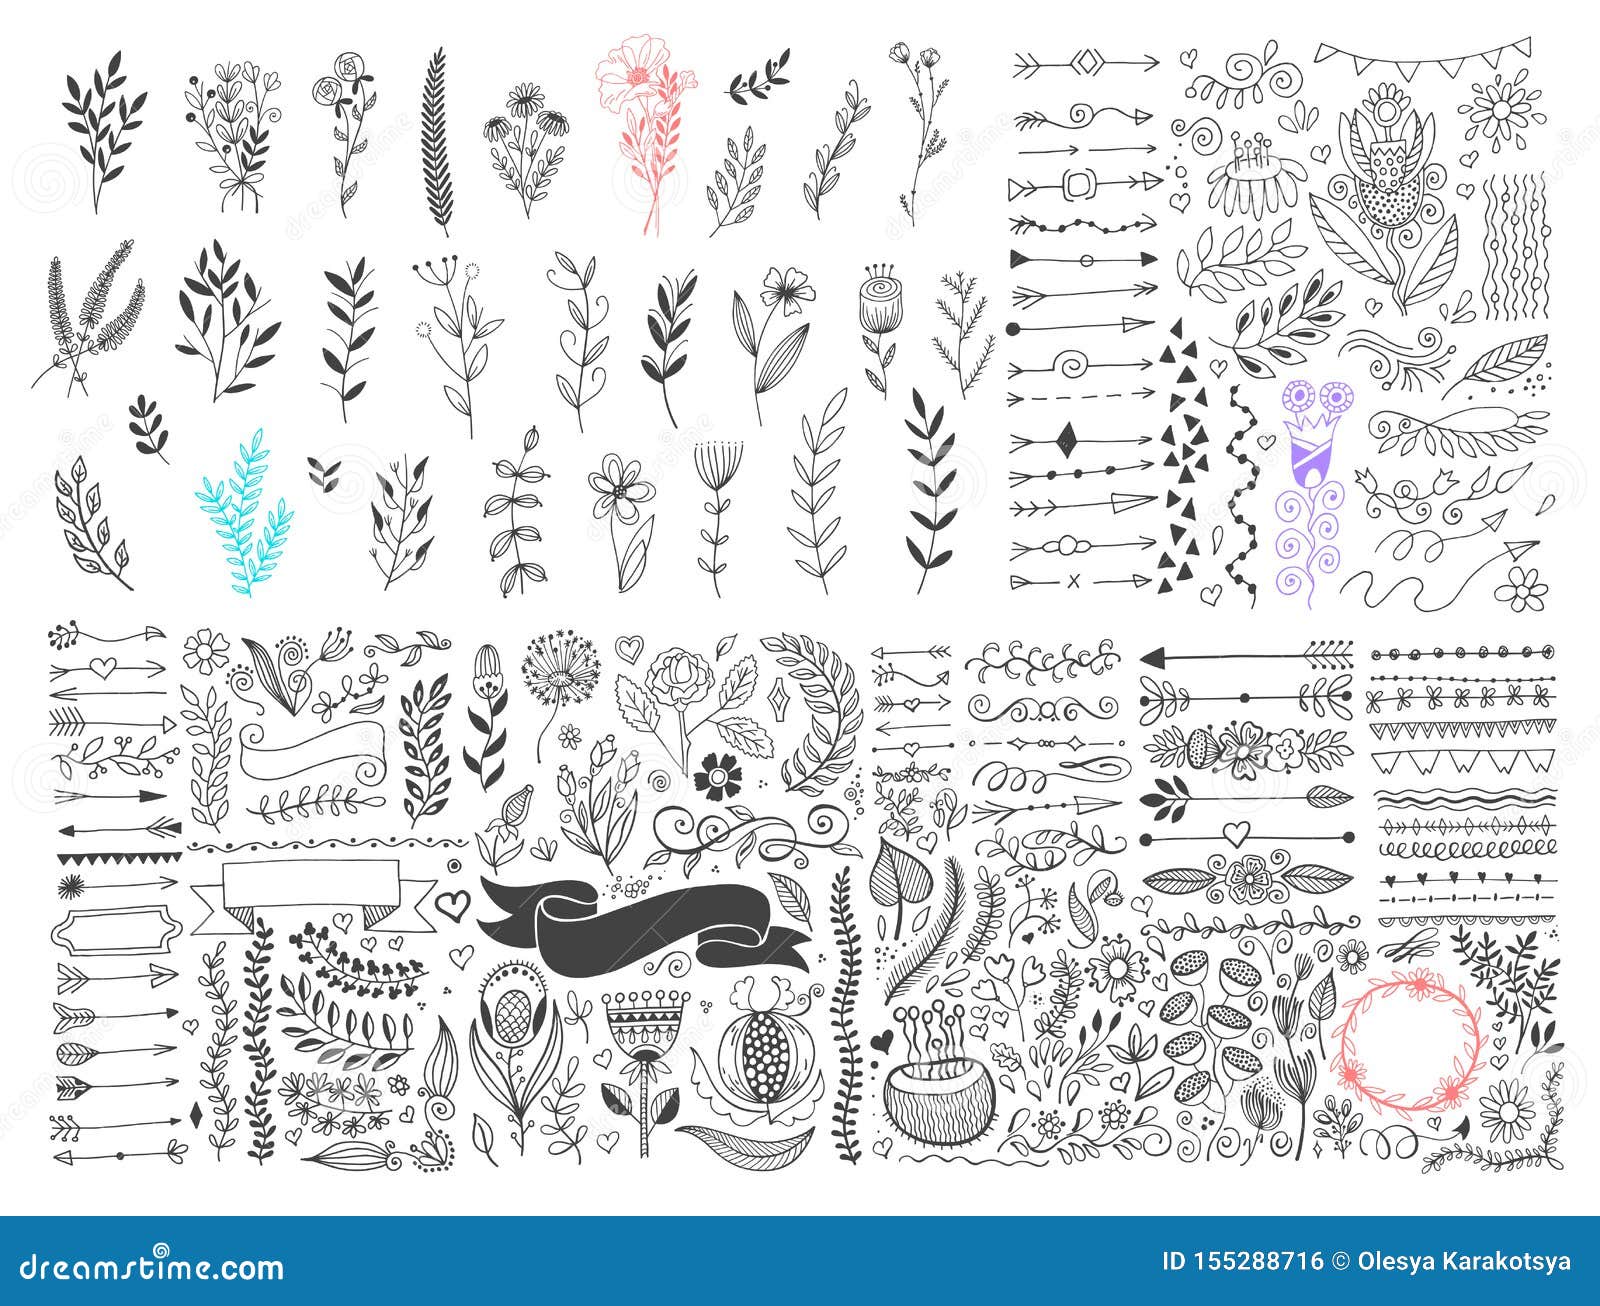 mega set of hand drawing page dividers borders and arrow, doodle floral  